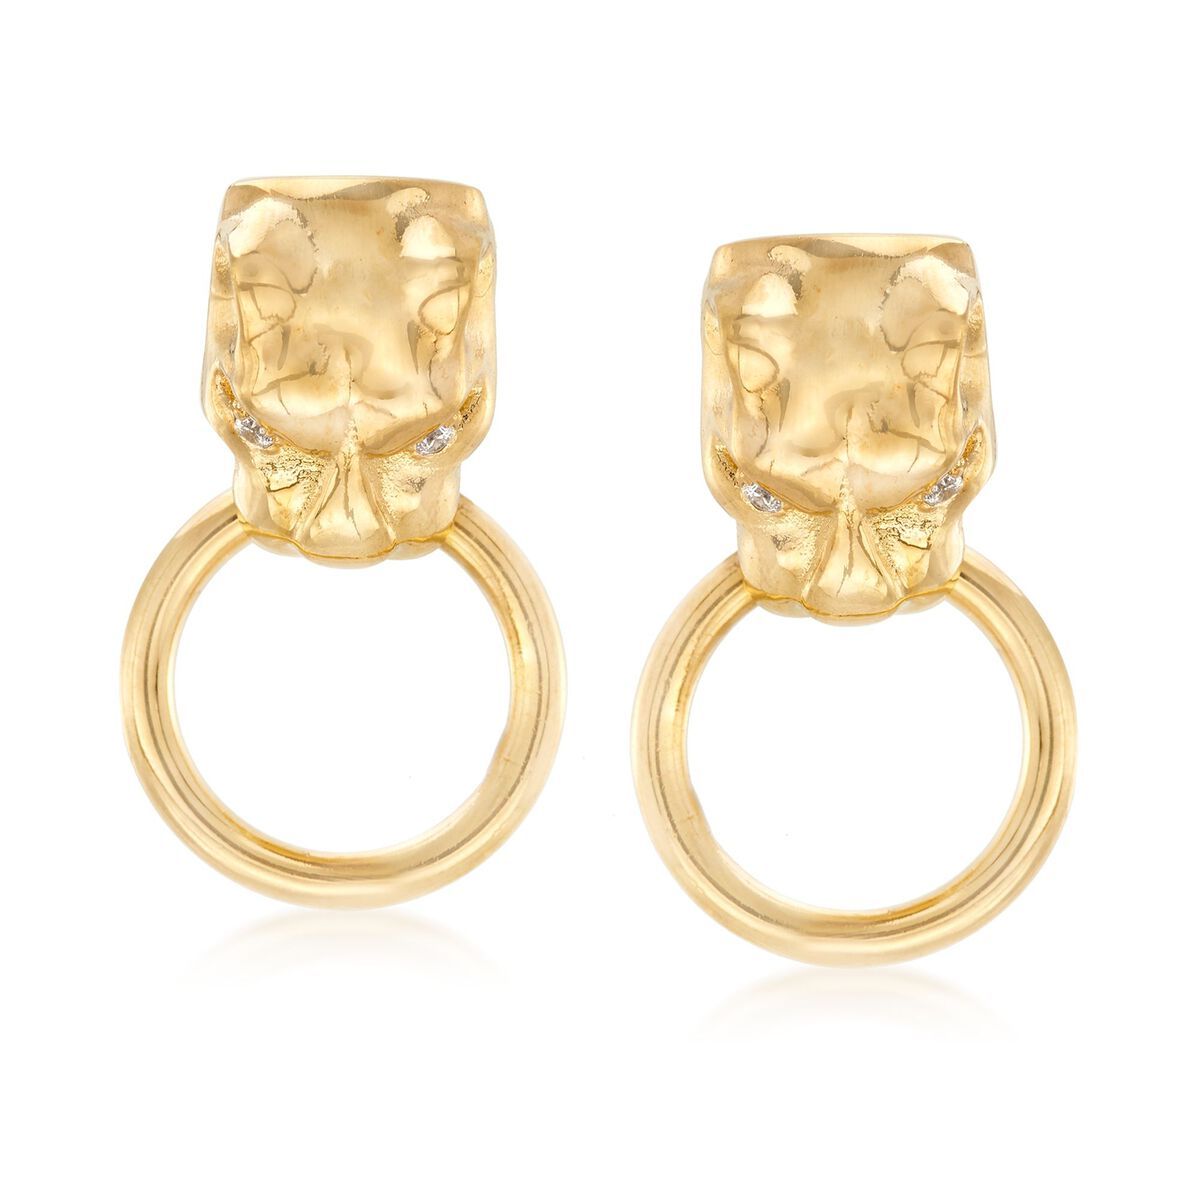 Italian 18kt Yellow Gold Over Sterling Silver Panther Head Doorknocker Earrings with CZ Accents | Ross-Simons